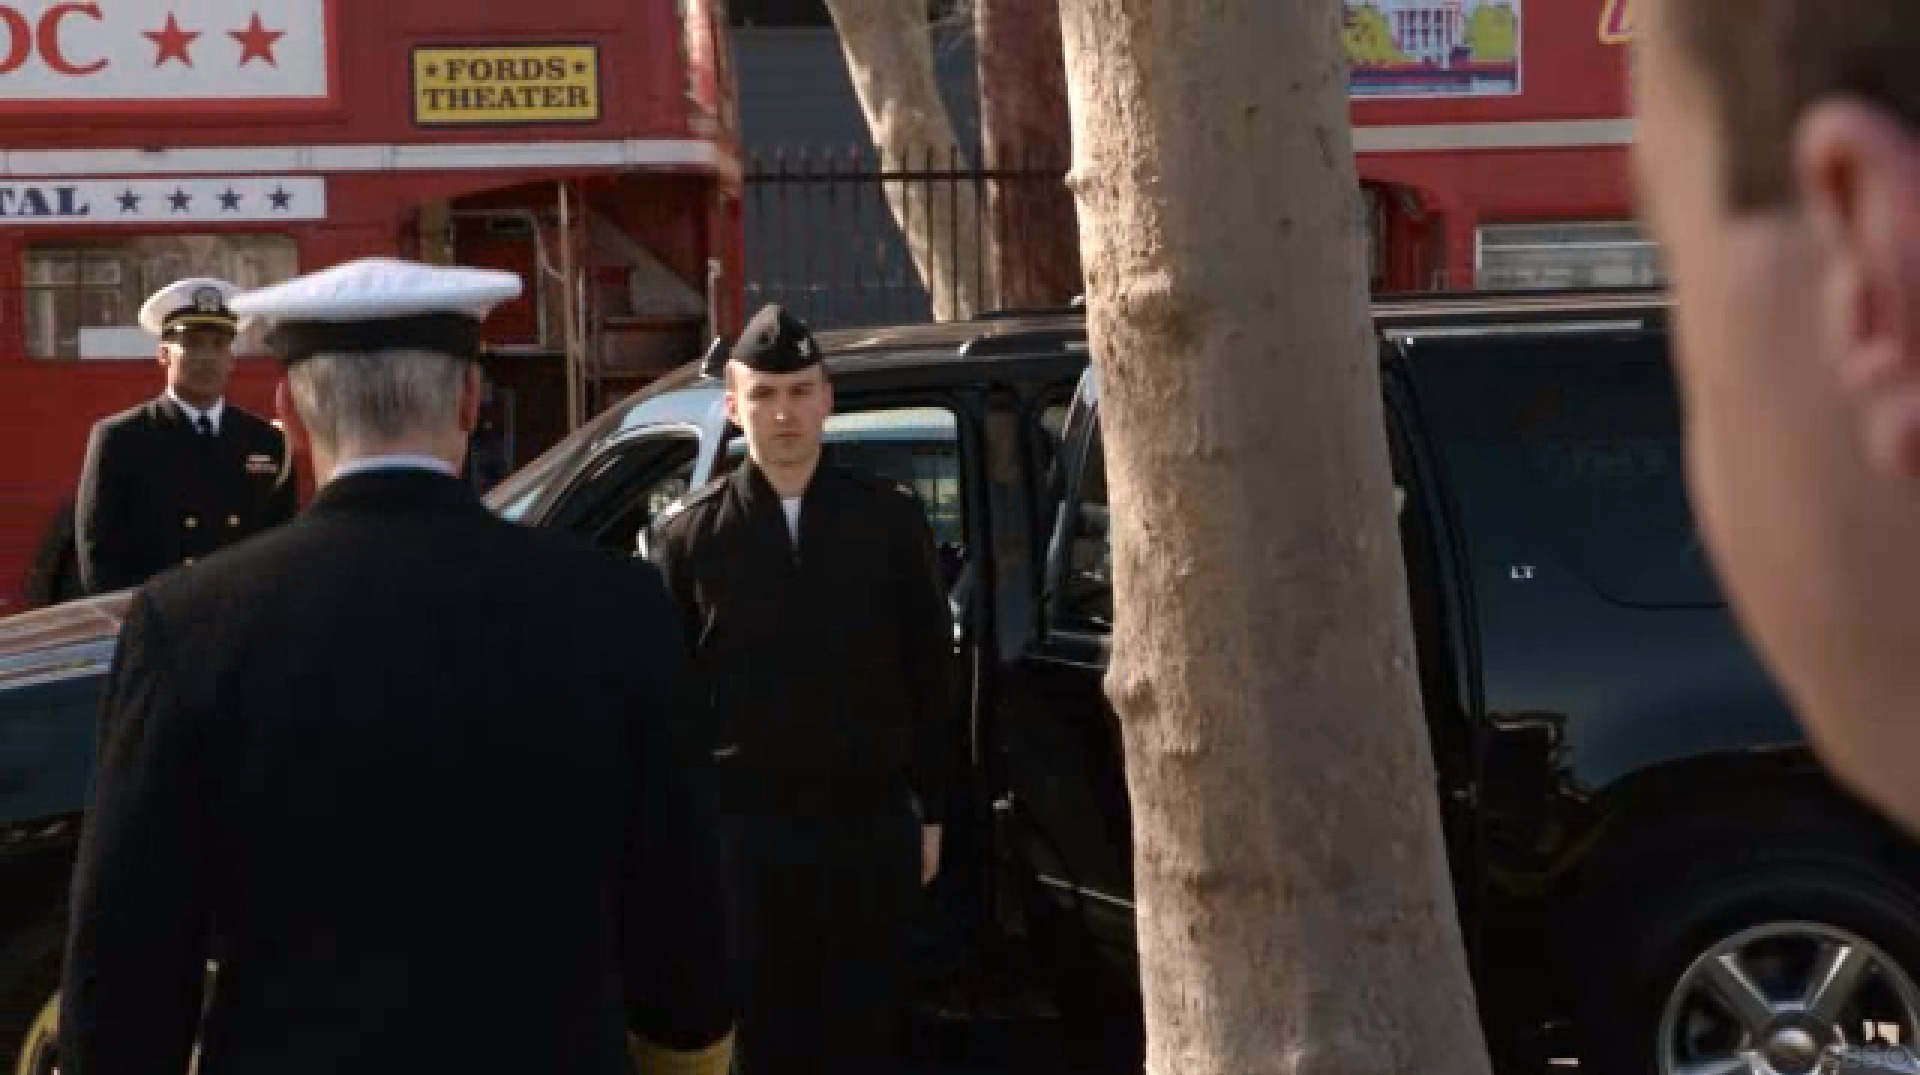 Brenden (center) waits for Admiral McGee during an episode on NCIS